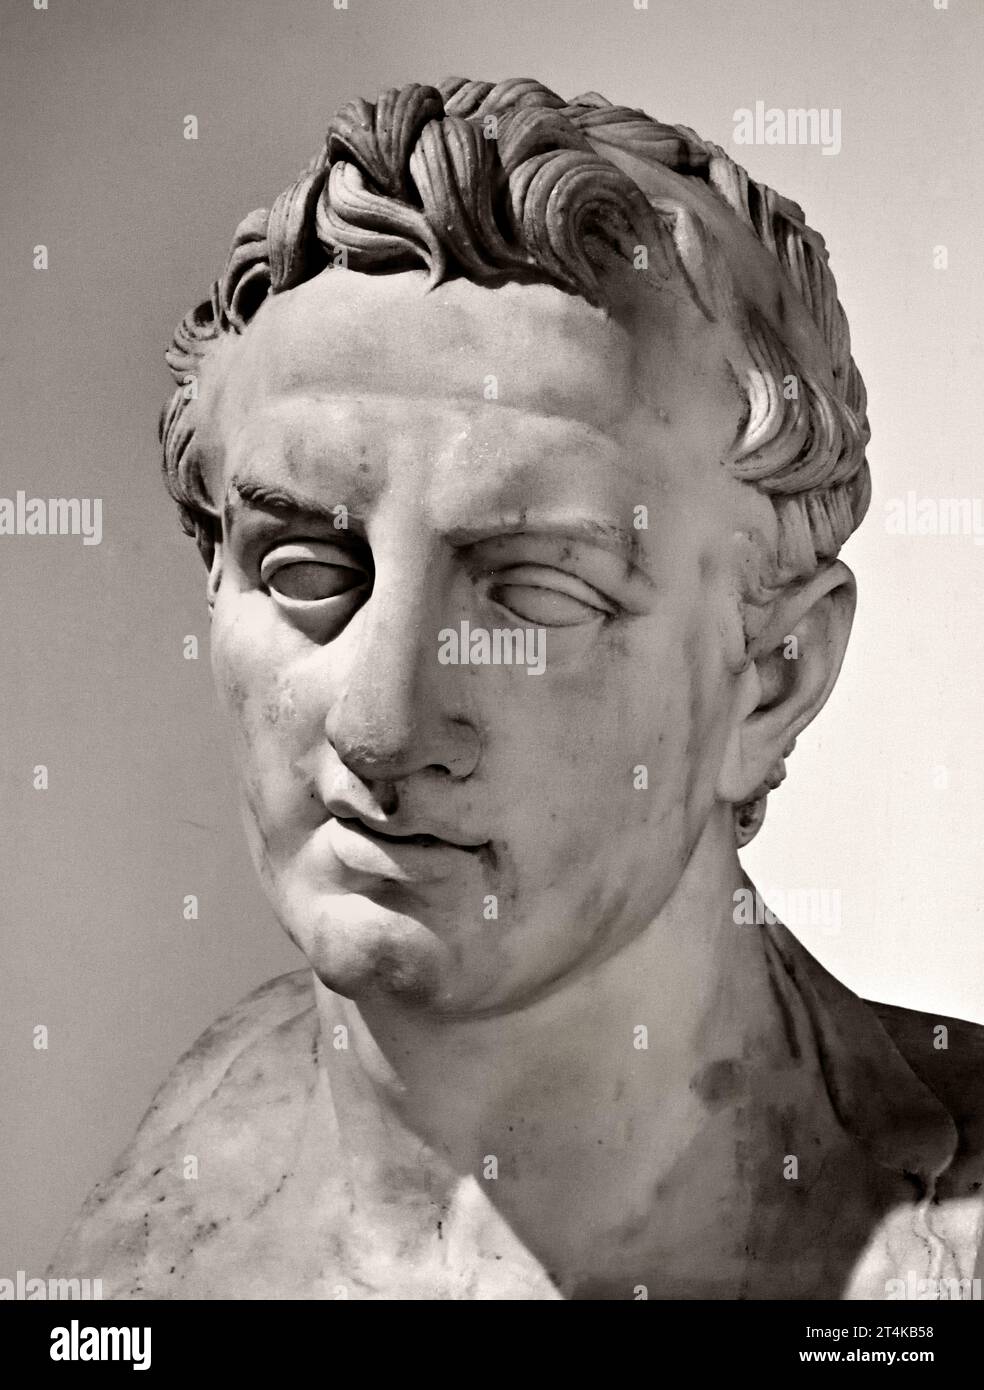 Ptolemy III Euergetes (282-222 BC). King of Egypt. Bust. Marble. Roman copy of an original of the 3rd century BC. Rectangular peristyle. Villa of the Papyri, Herculaneum. ( third century AD)                                  National Archaeological Museum of Naples Italy. Stock Photo